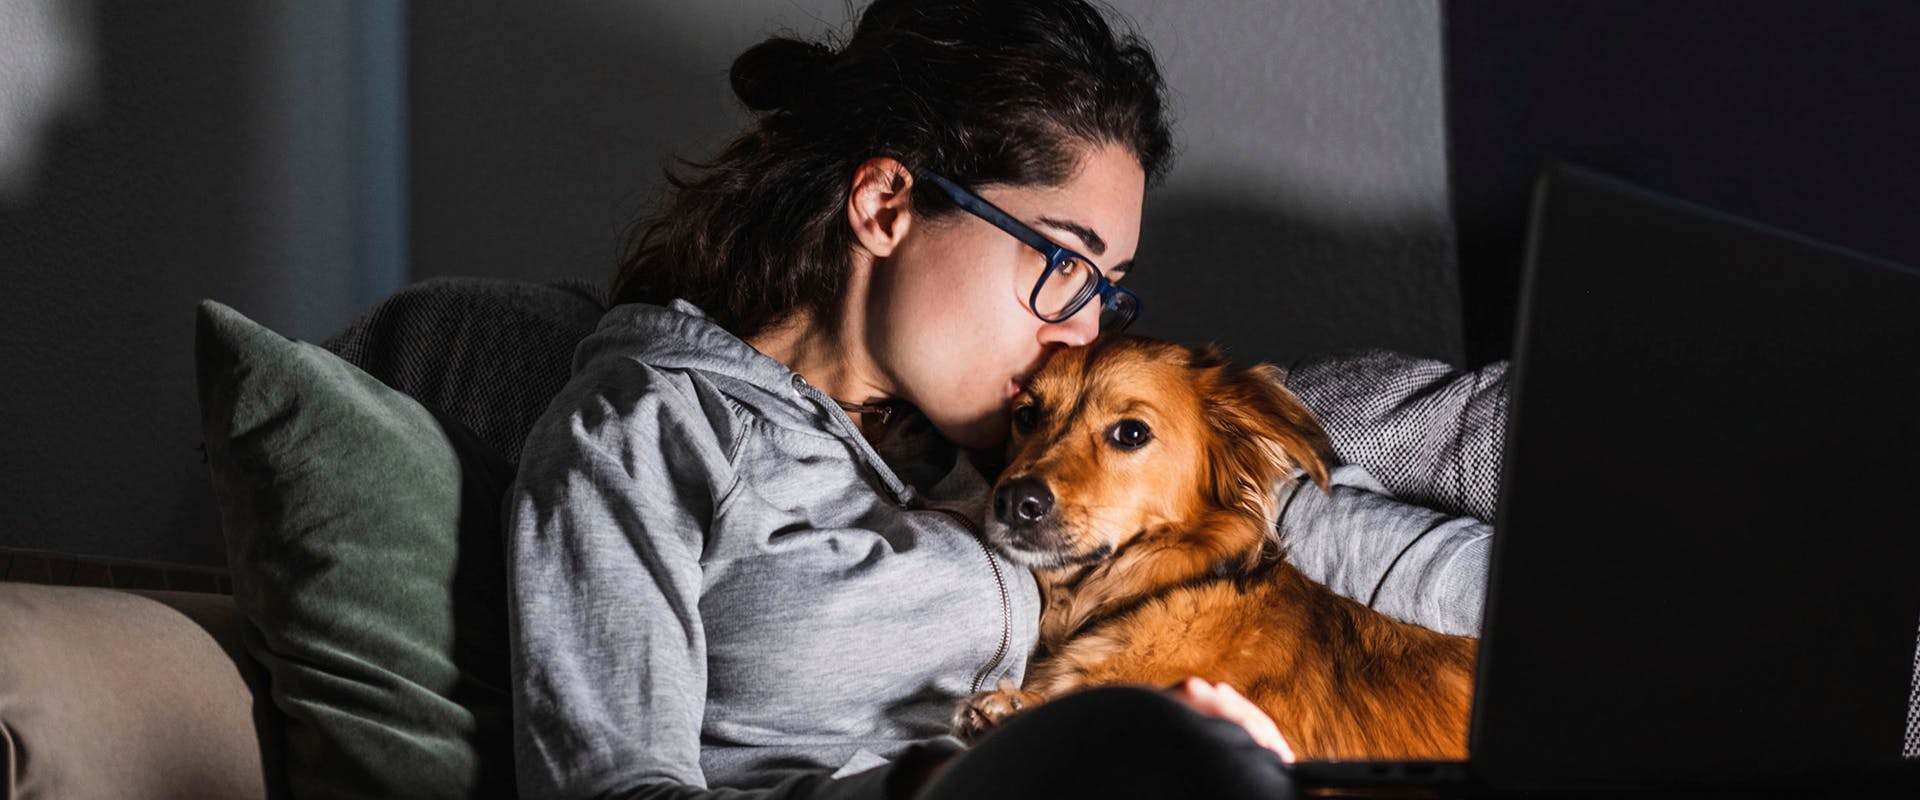 A woman cuddling with her dog while watching a film on her laptop